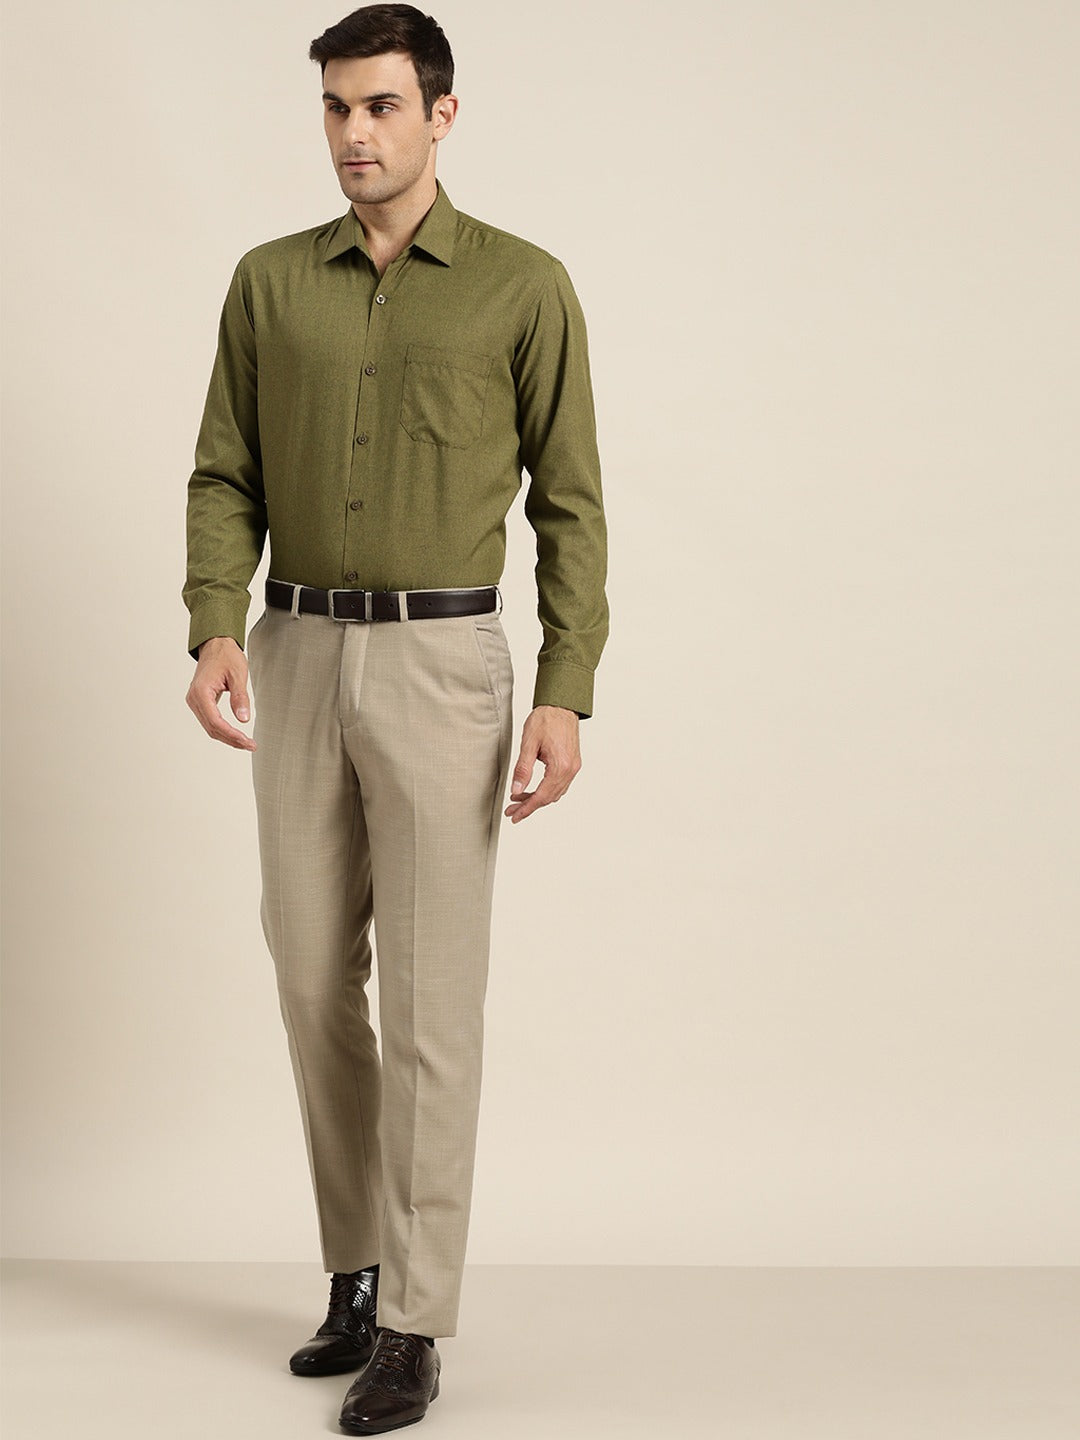 Men's Cotton Olive Green Casual Shirt